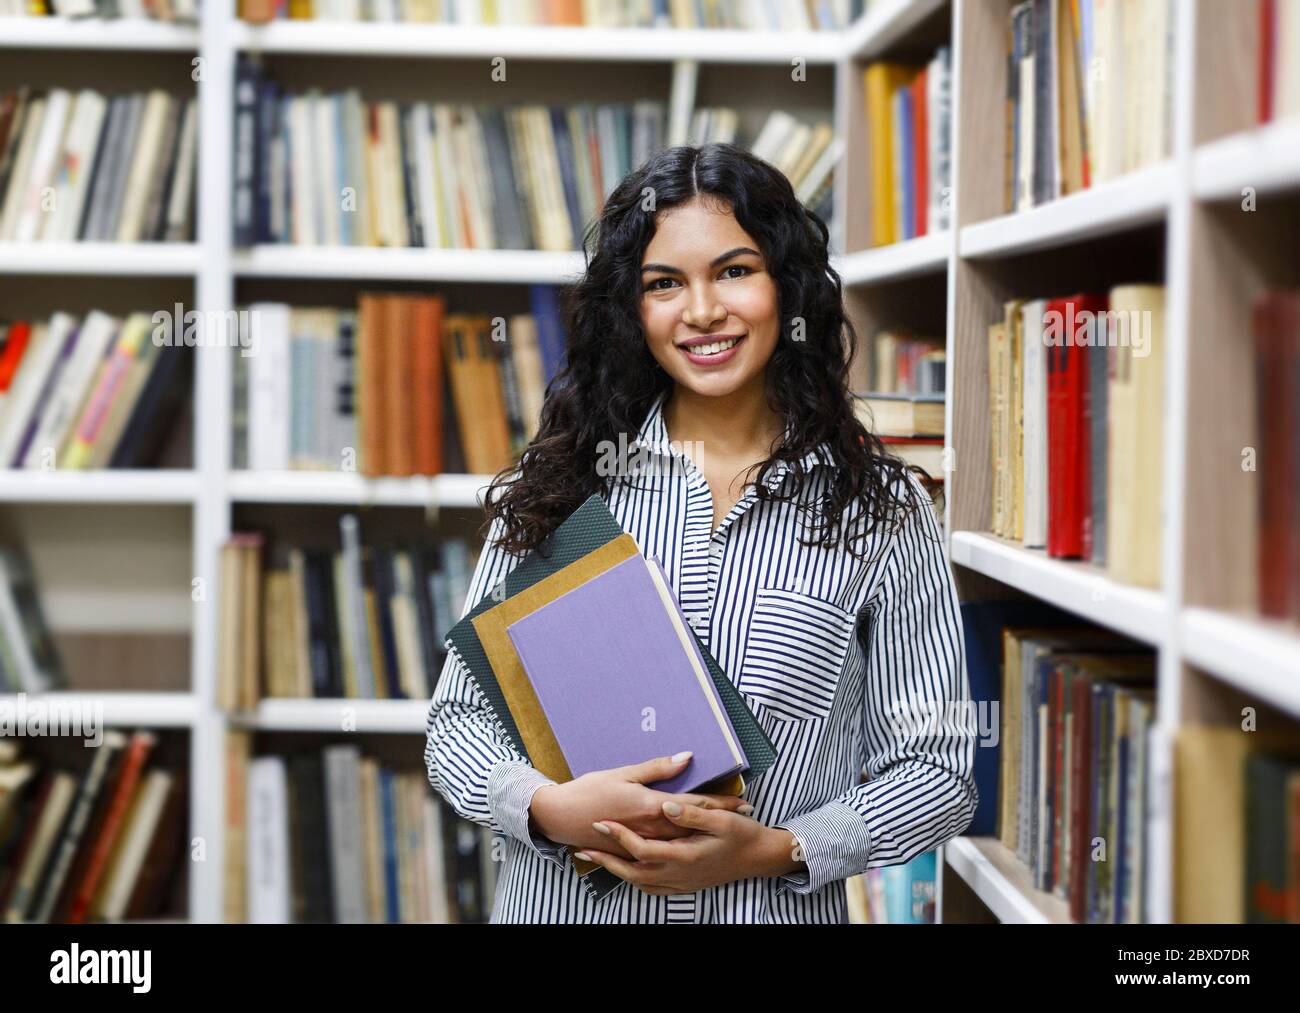 Smiling latina girl holding textbooks at library Stock Photo